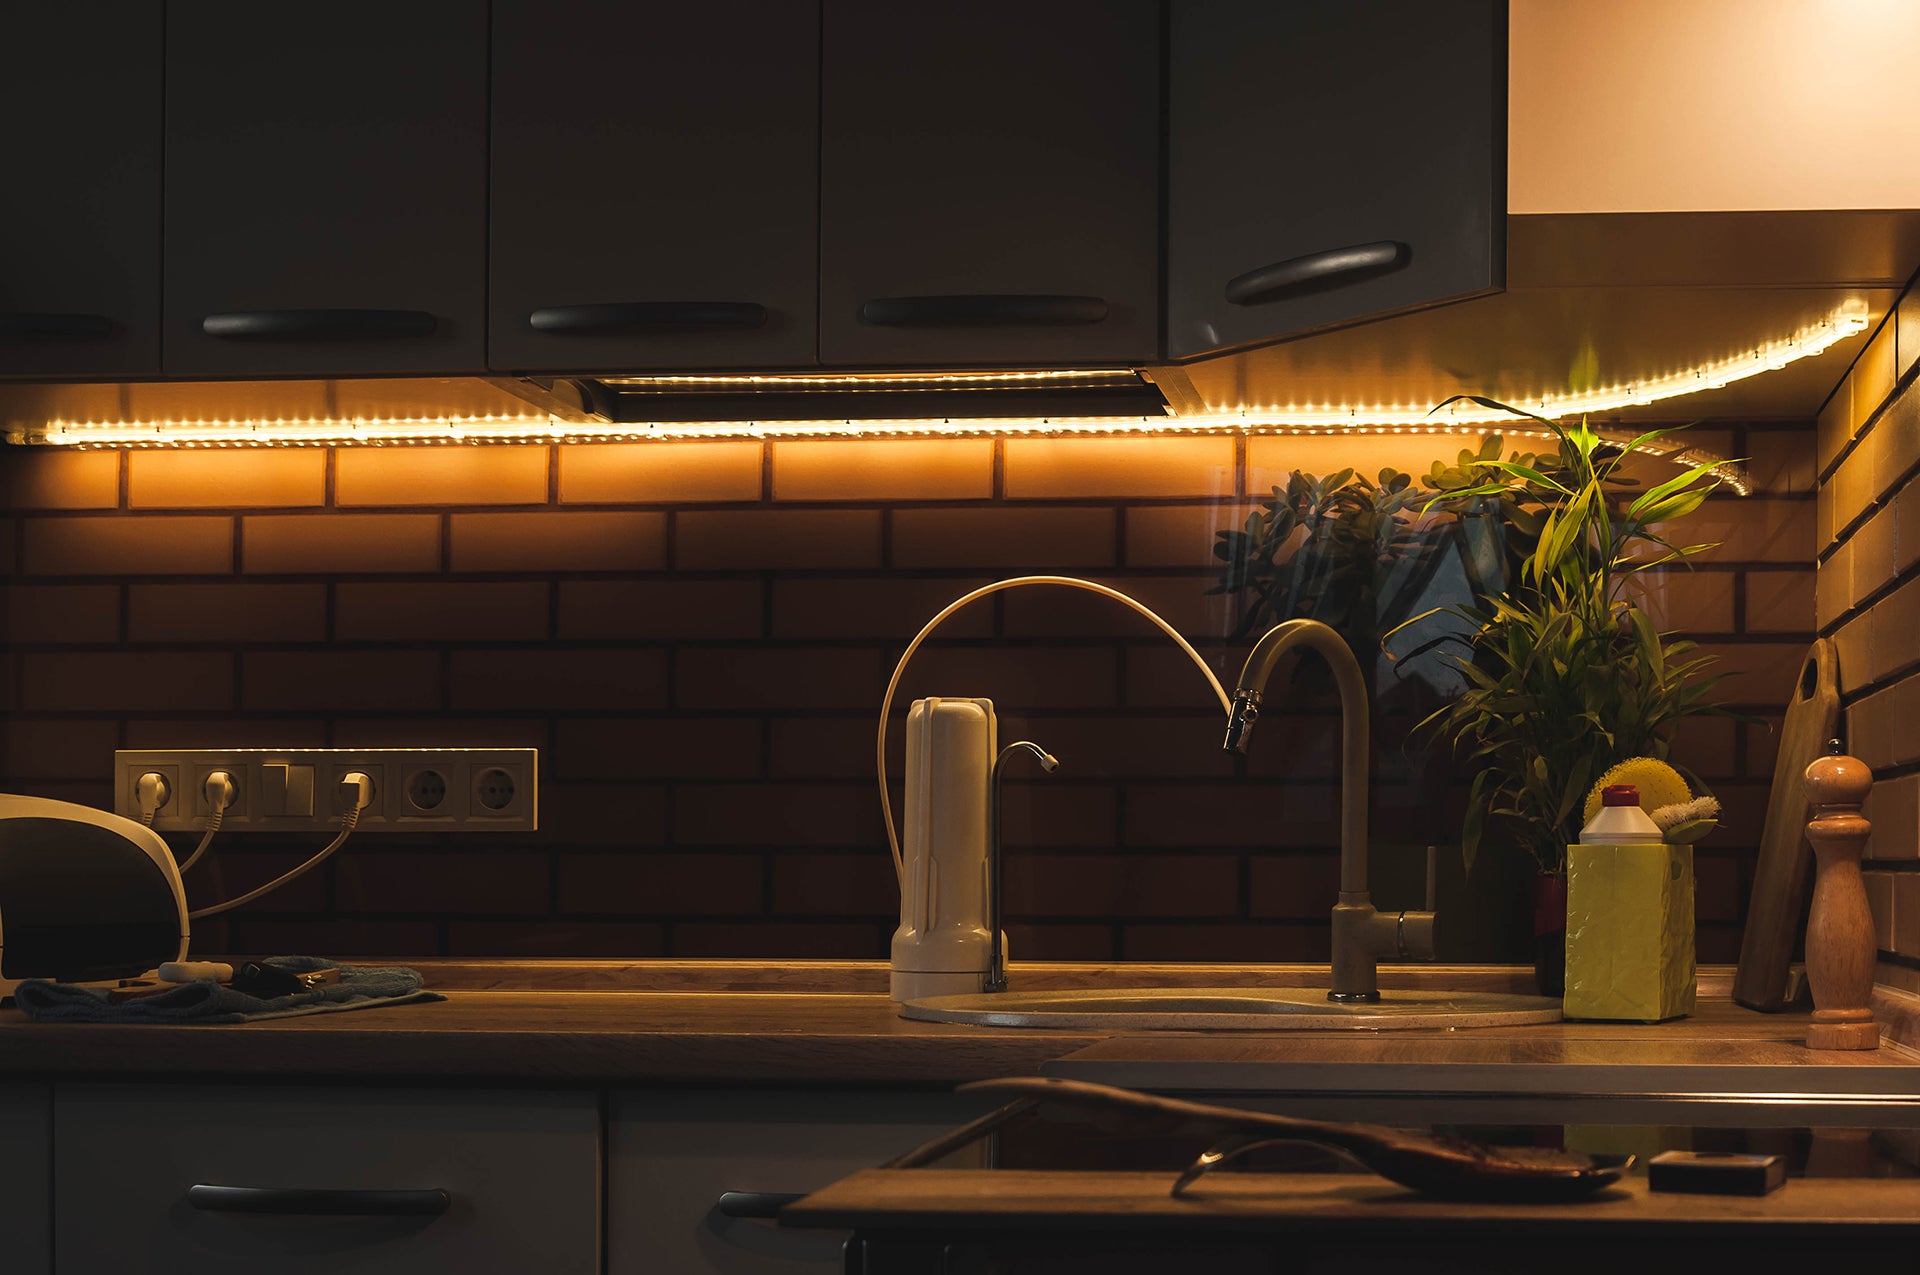 From Sunrise to Sunset How Smart LED Lighting Can Mimic Natural Light Sources